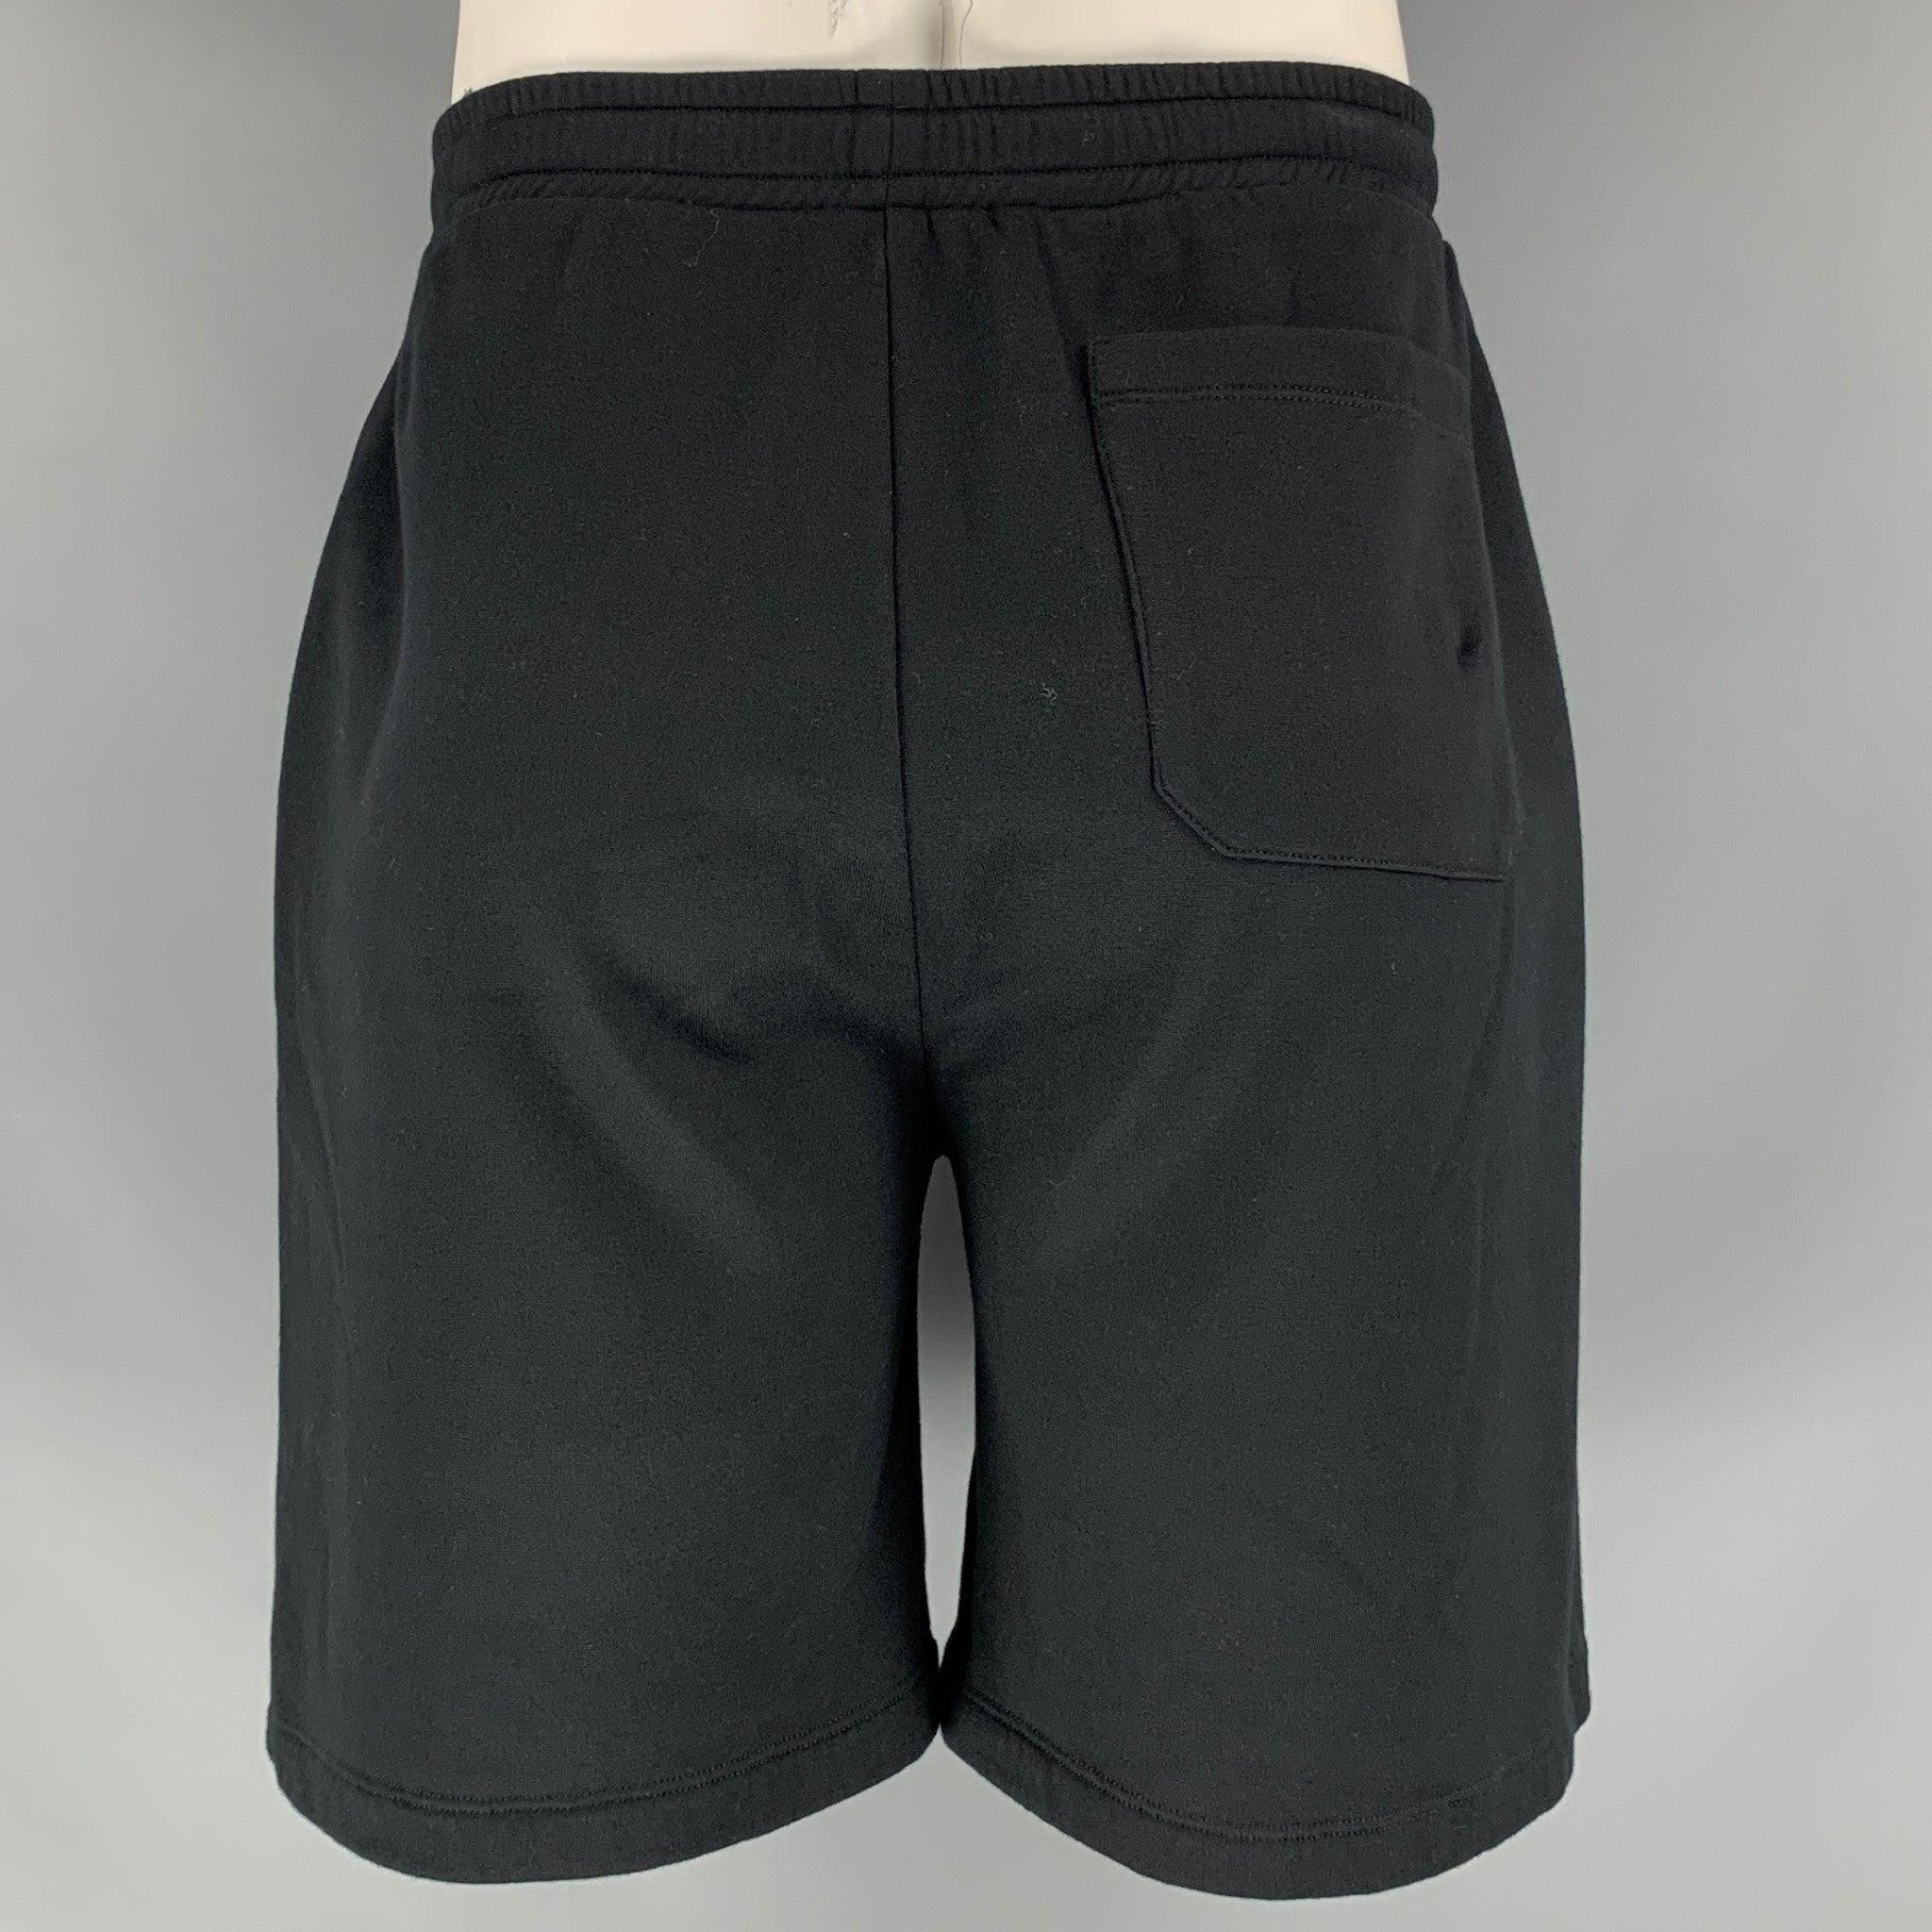 VALENTINO 'VLTN' shorts comes in a cotton polyamide material featuring a drawstring and an elastic waistband. Made in Italy.Excellent Pre-Owned Condition. 

Marked:   M 

Measurements: 
  Waist: 33 inches Rise: 16 inches Inseam: 7.5 inches 
  
  
